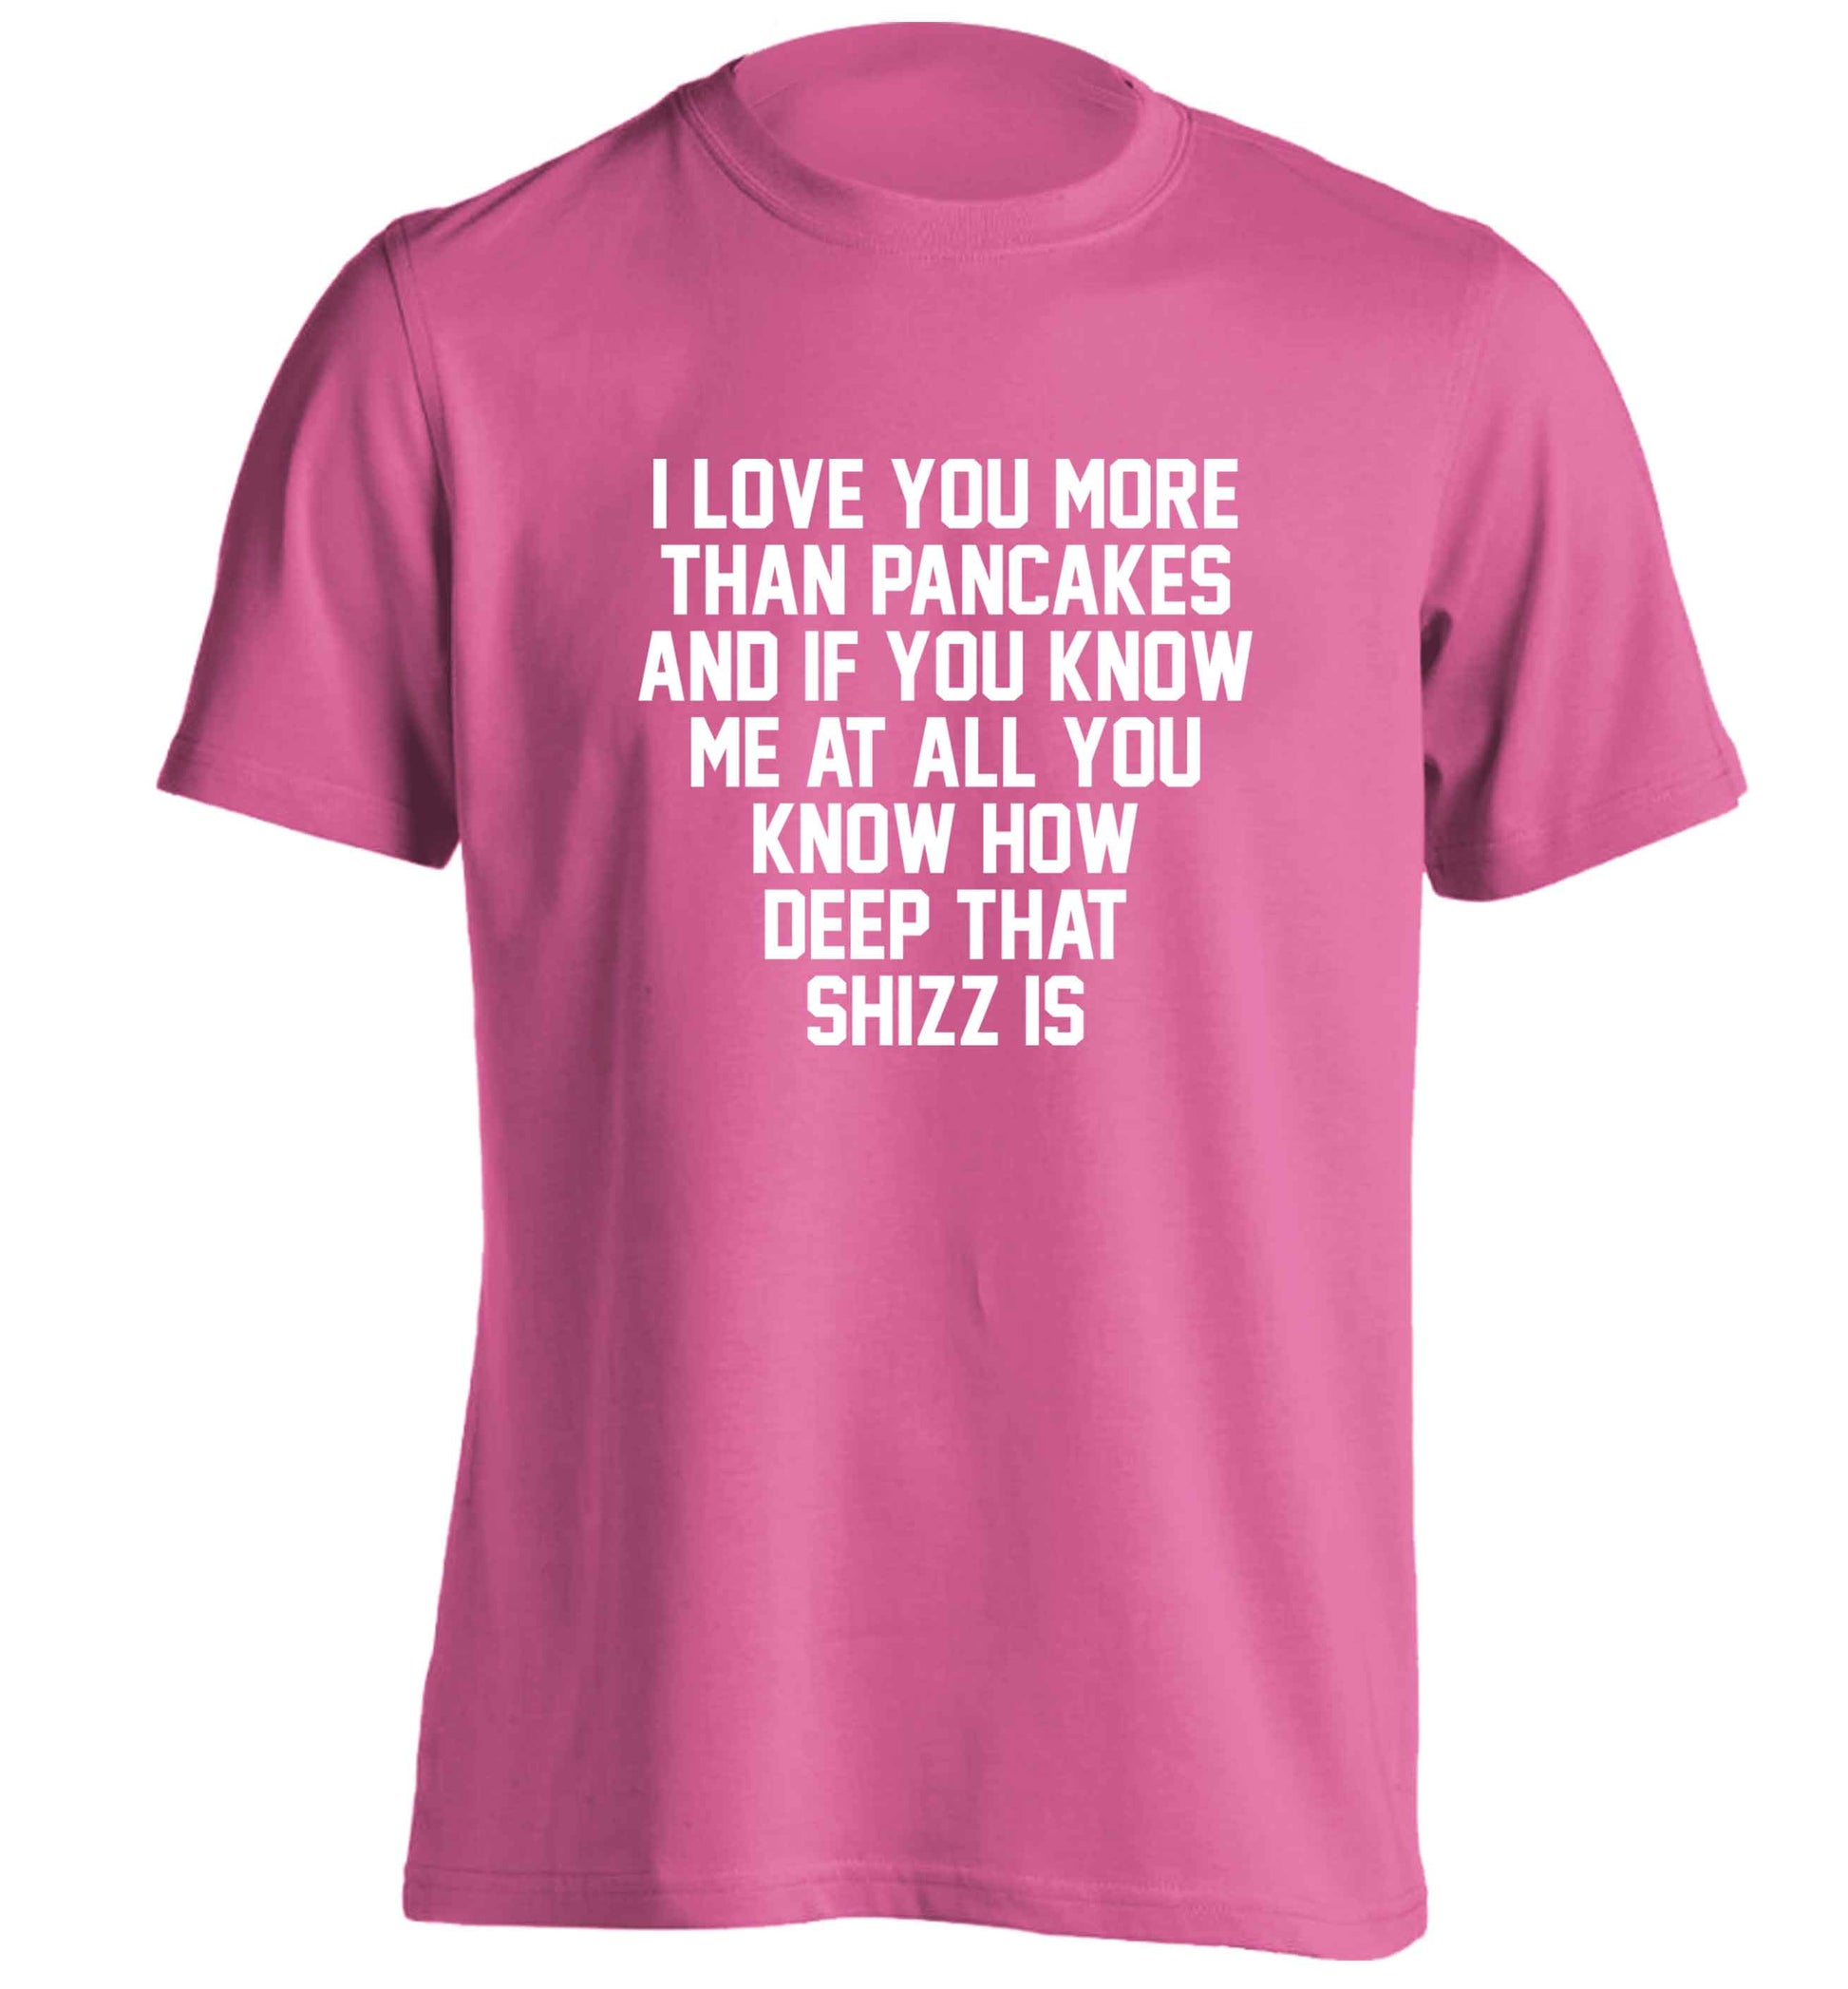 I love you more than pancakes and if you know me at all you know how deep that shizz is adults unisex pink Tshirt 2XL